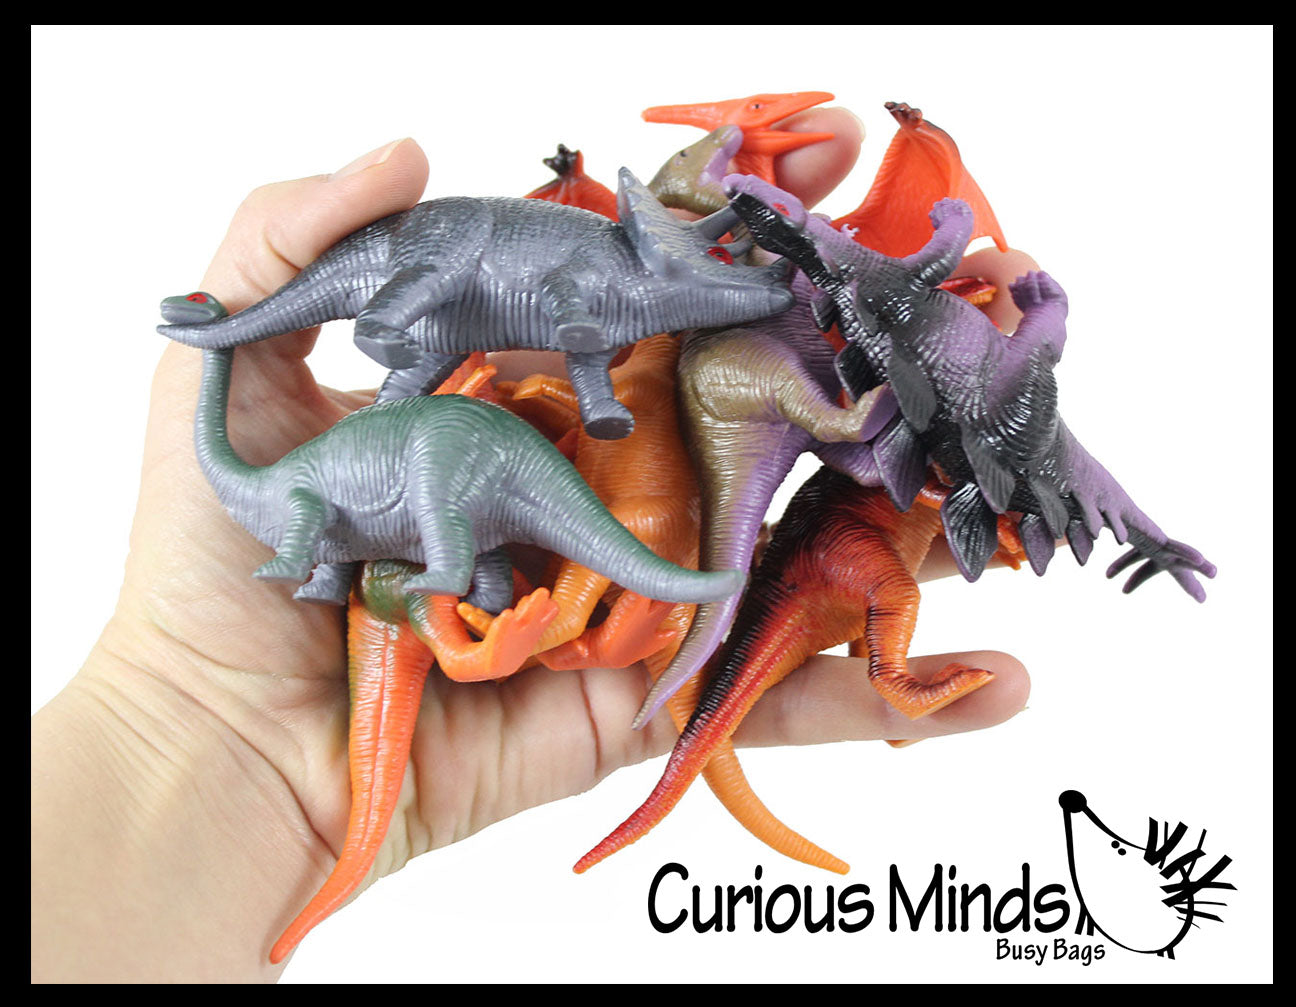 Large 4" Dino Figurines - Mini Dinosaur Replica Figures Toys - Small Novelty Prize Toy - Party Favors - Gift